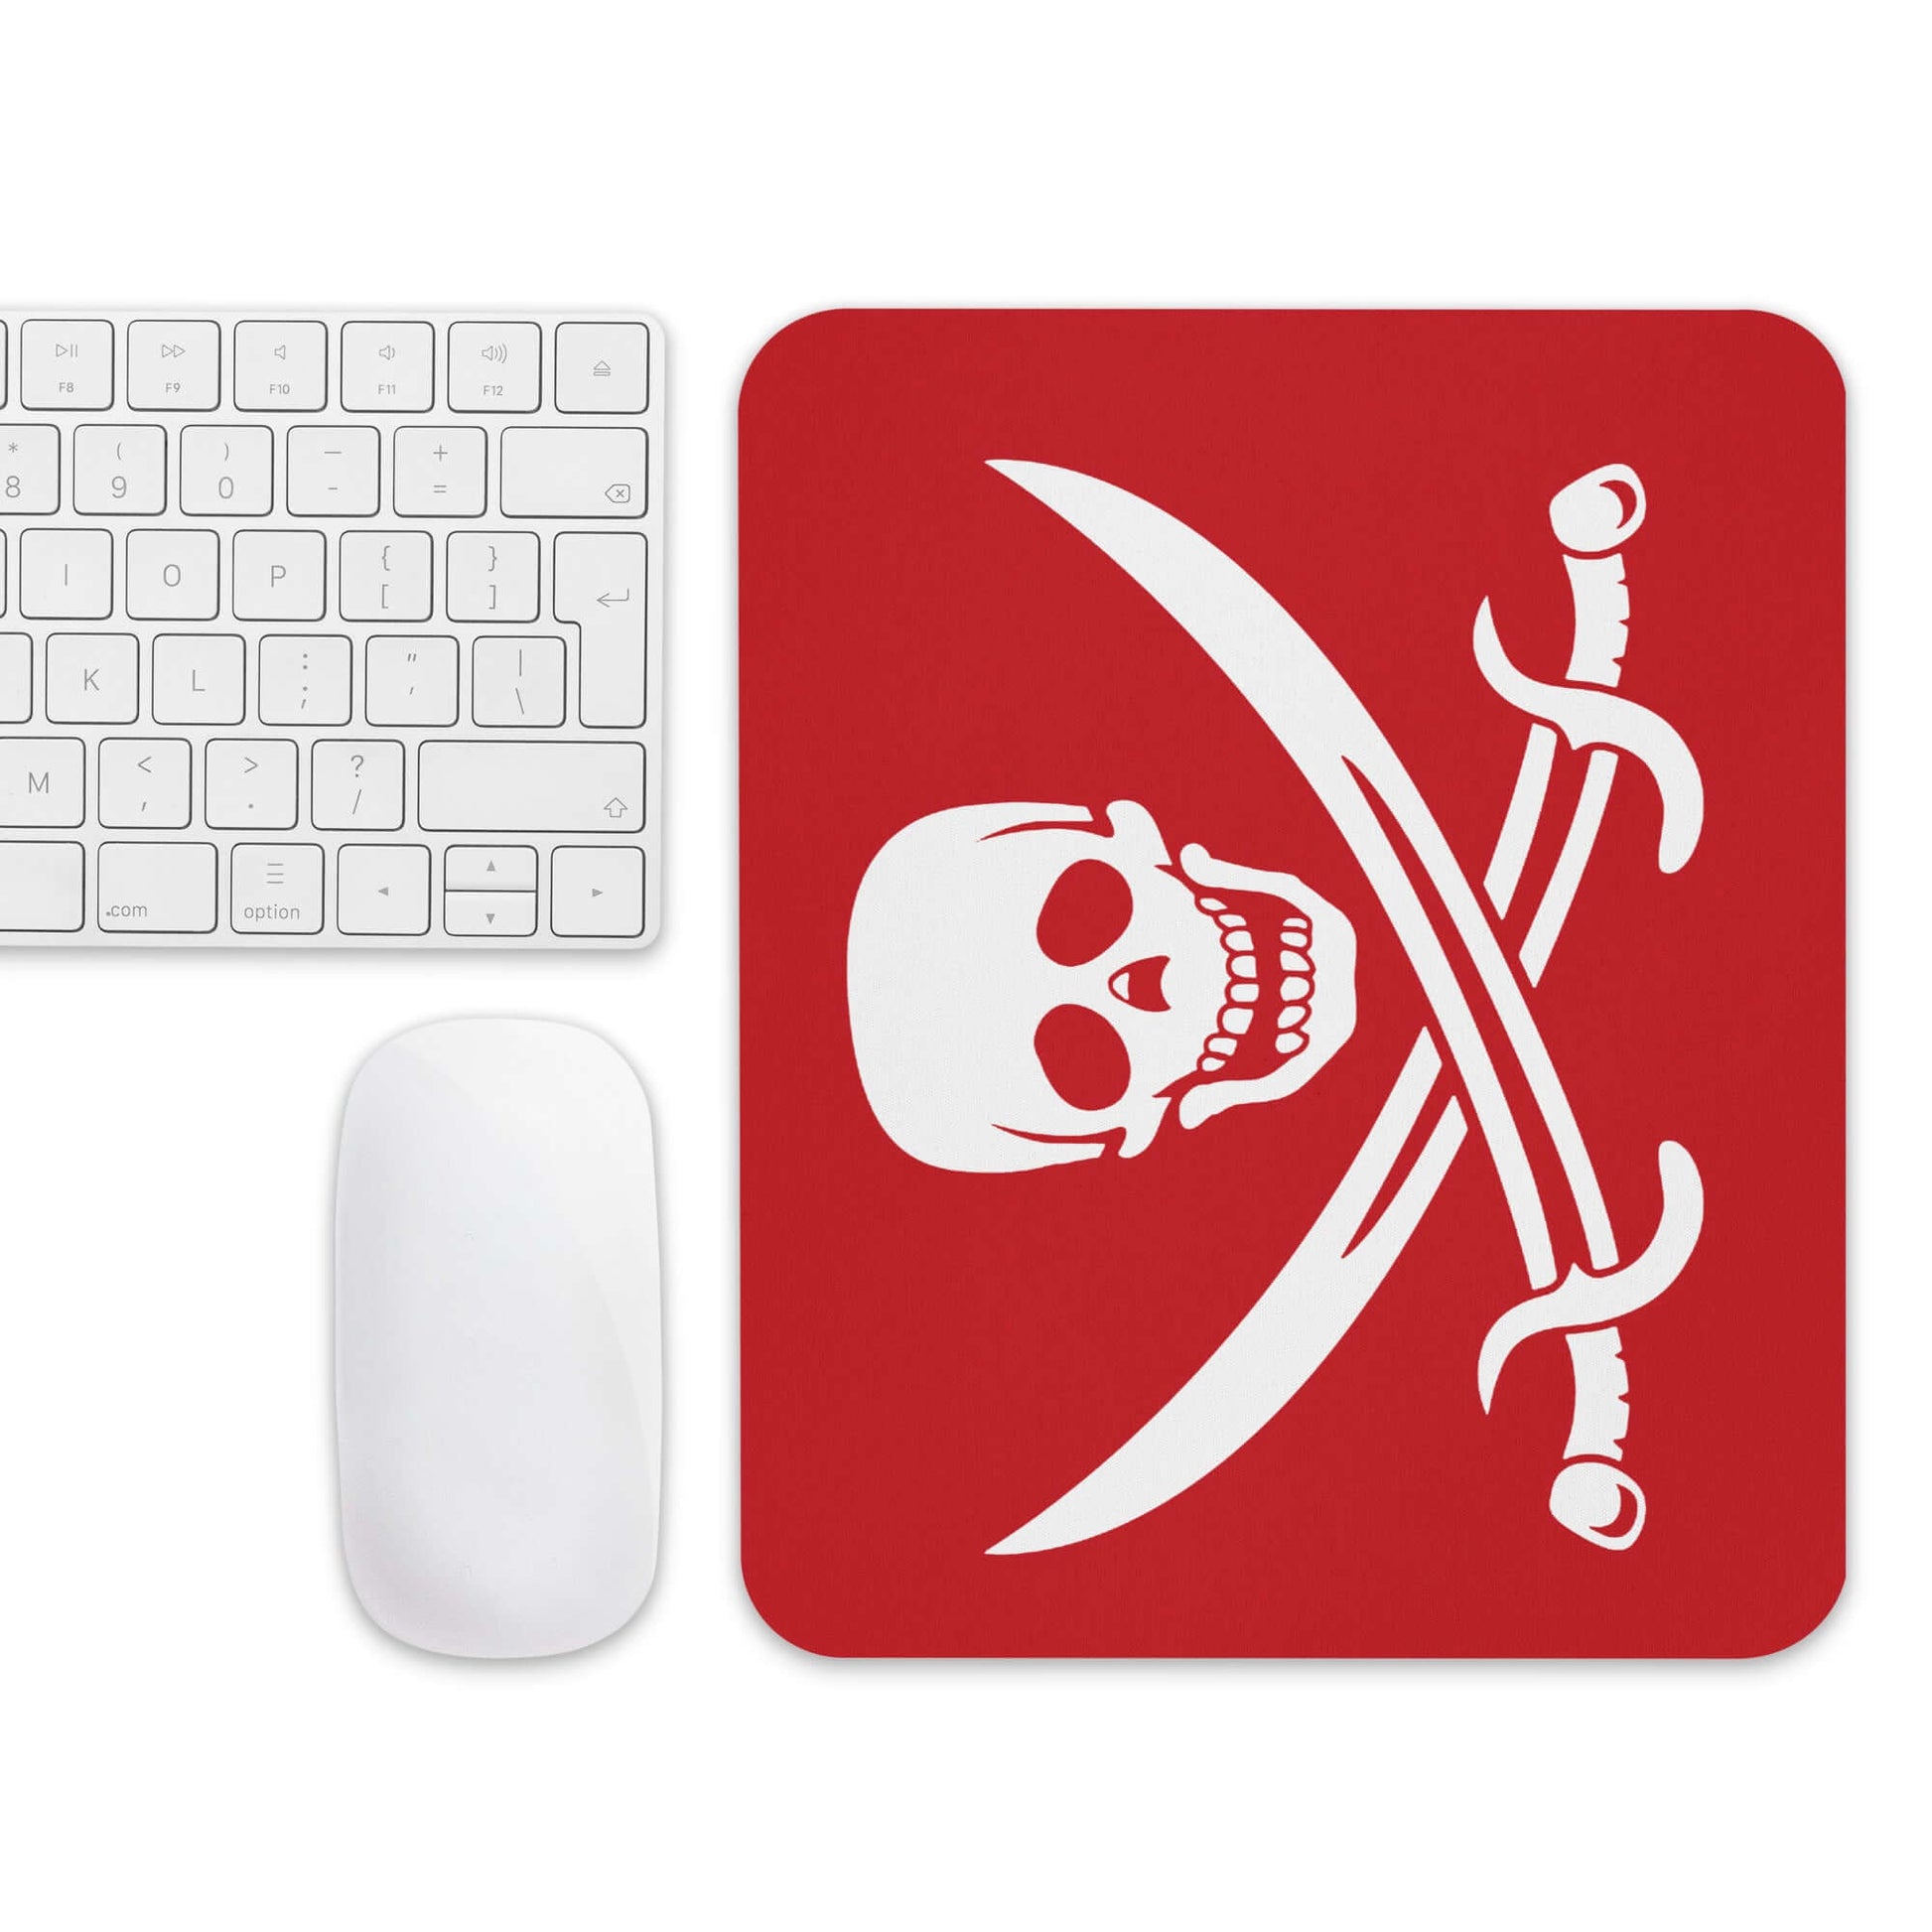 Pirate Flag Mouse pad, no quarter dont tread on me gadsden No quarter pirate pirate flag quarter